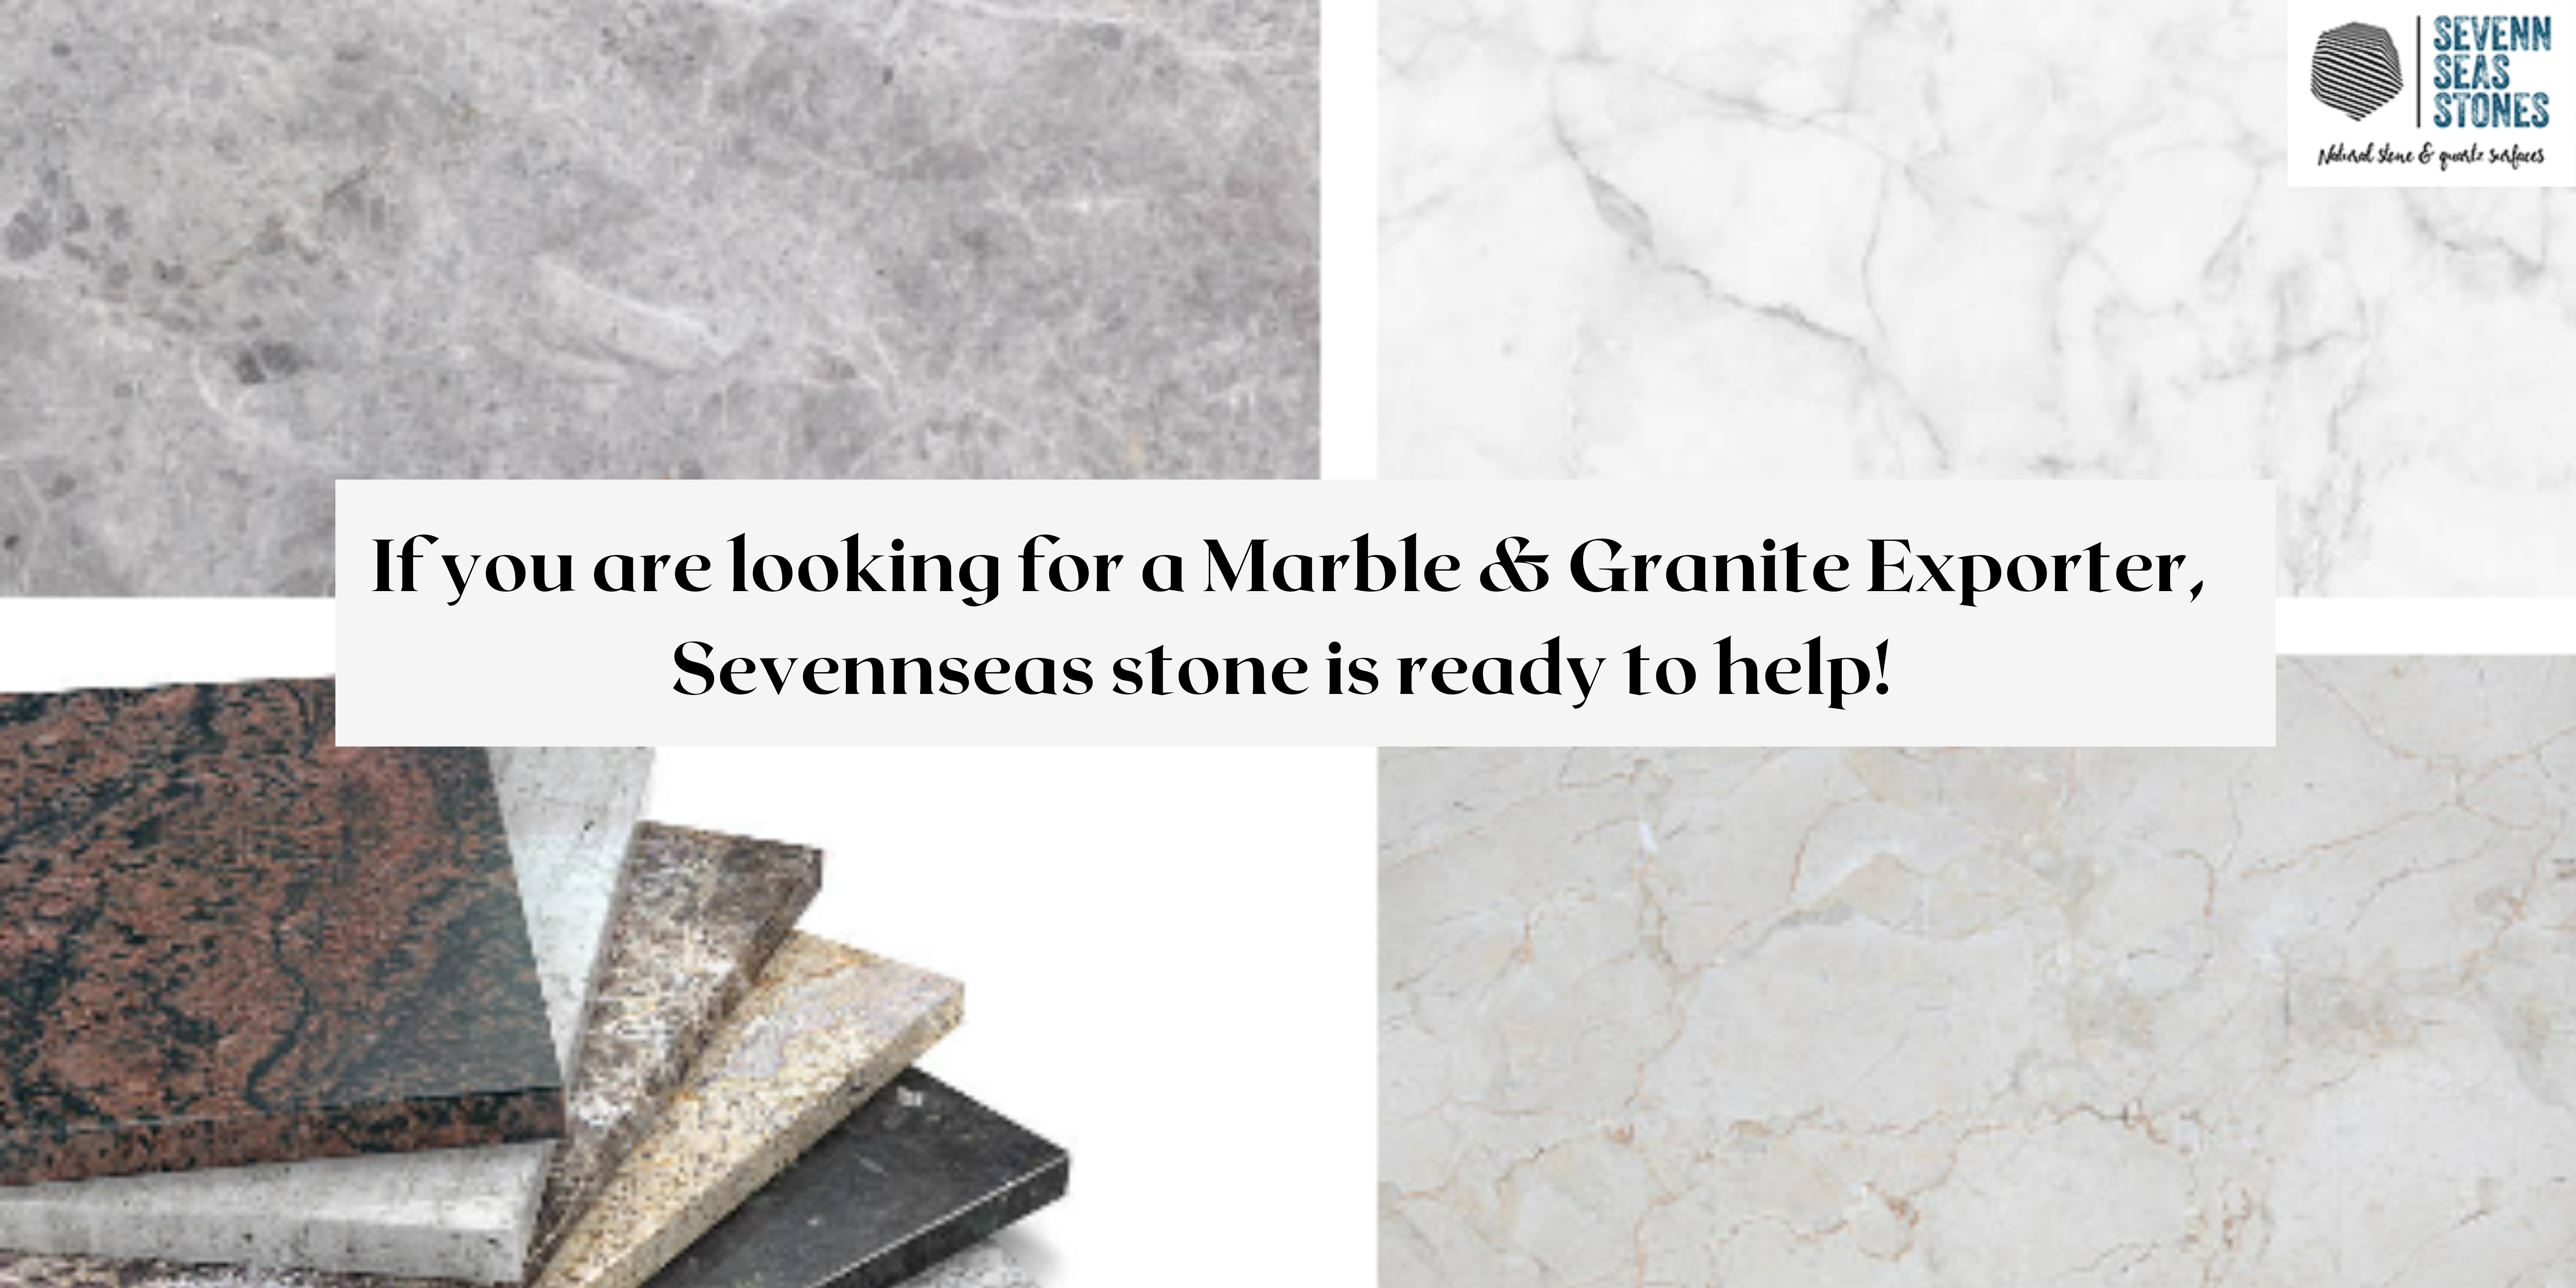 blog-If you are looking for a Marble & Granite Exporter, Sevennseas stone is ready to help!